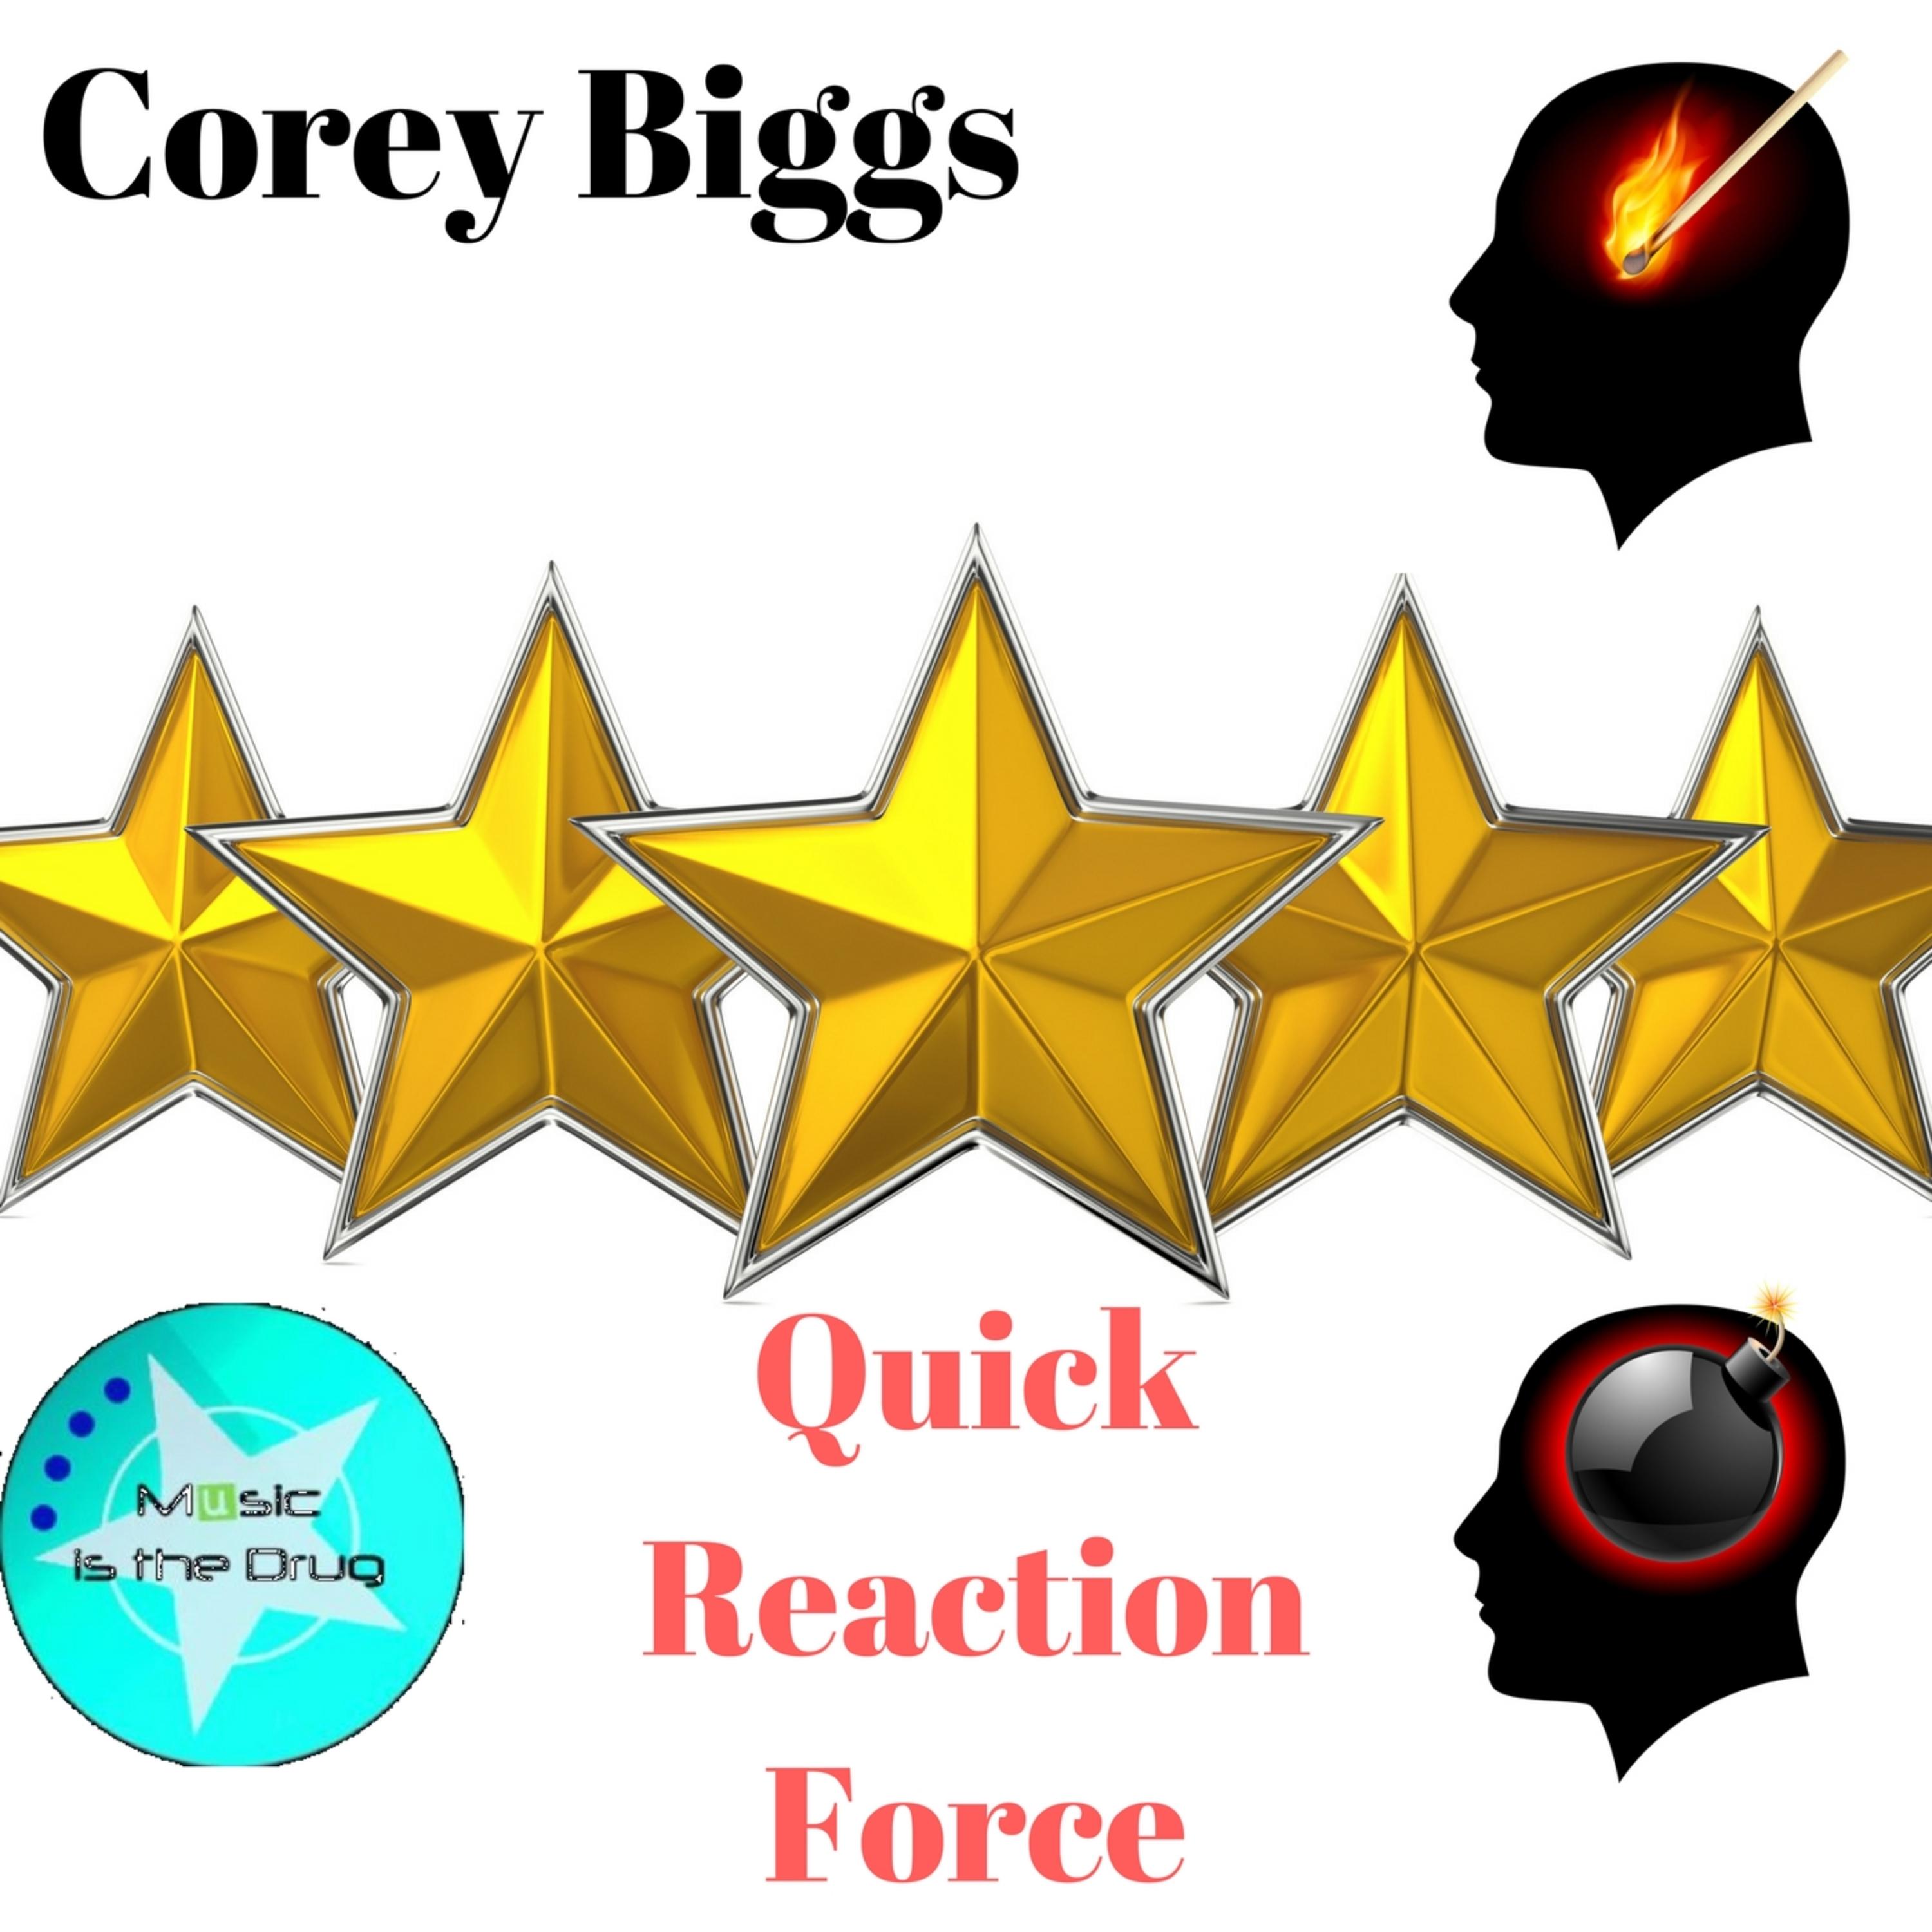 Quick Reaction Force